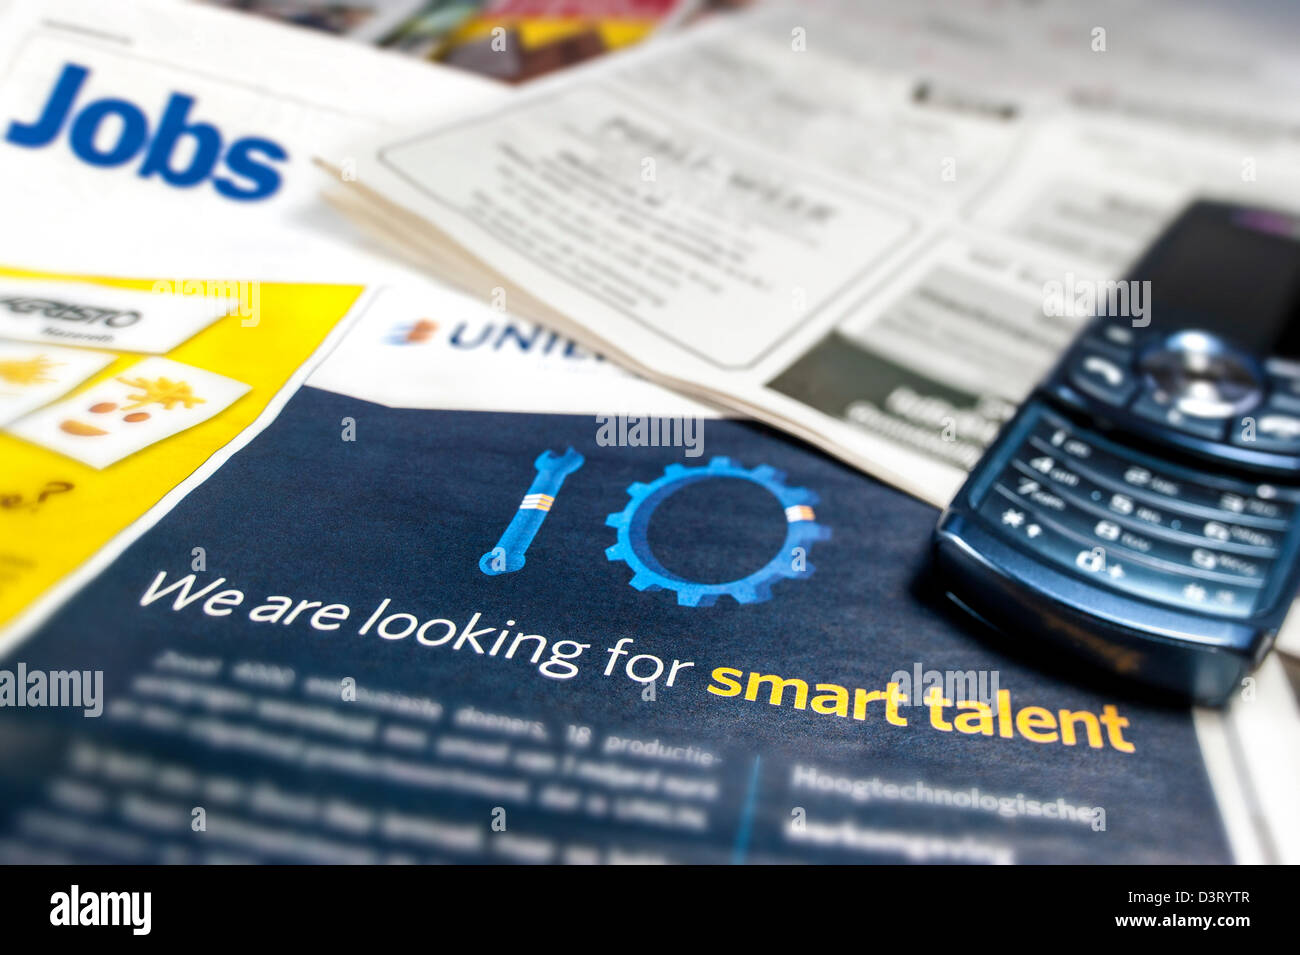 Cell phone and advertisements for jobs for unemployed workers on employment page in newspapers Stock Photo